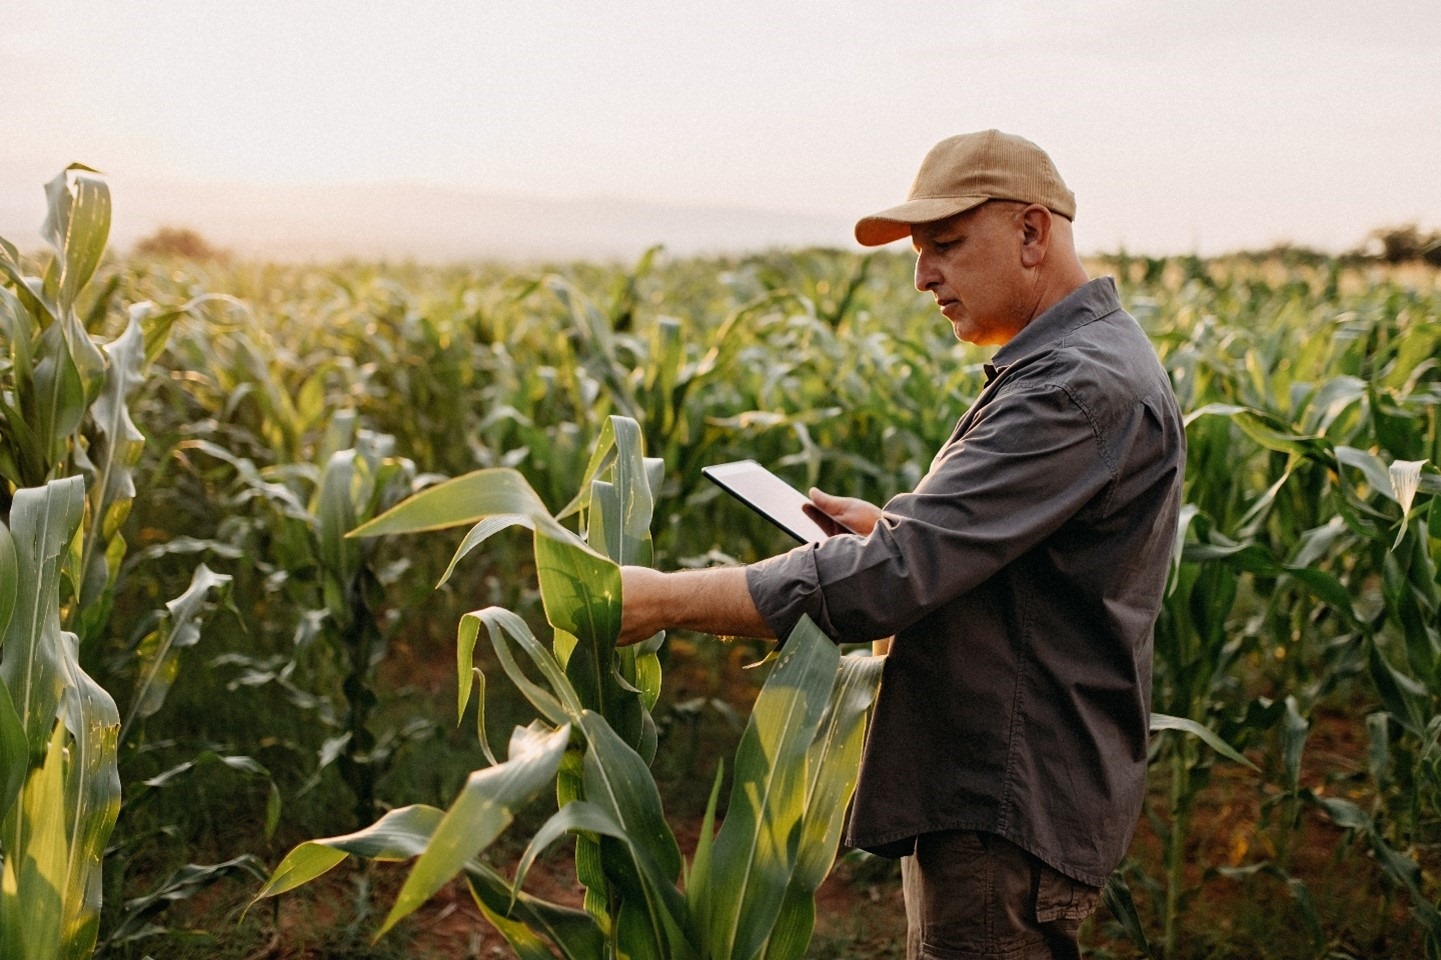 Evolving Microsoft Azure Data Manager for Agriculture to transform data into intuitive insights | Microsoft Azure Blog